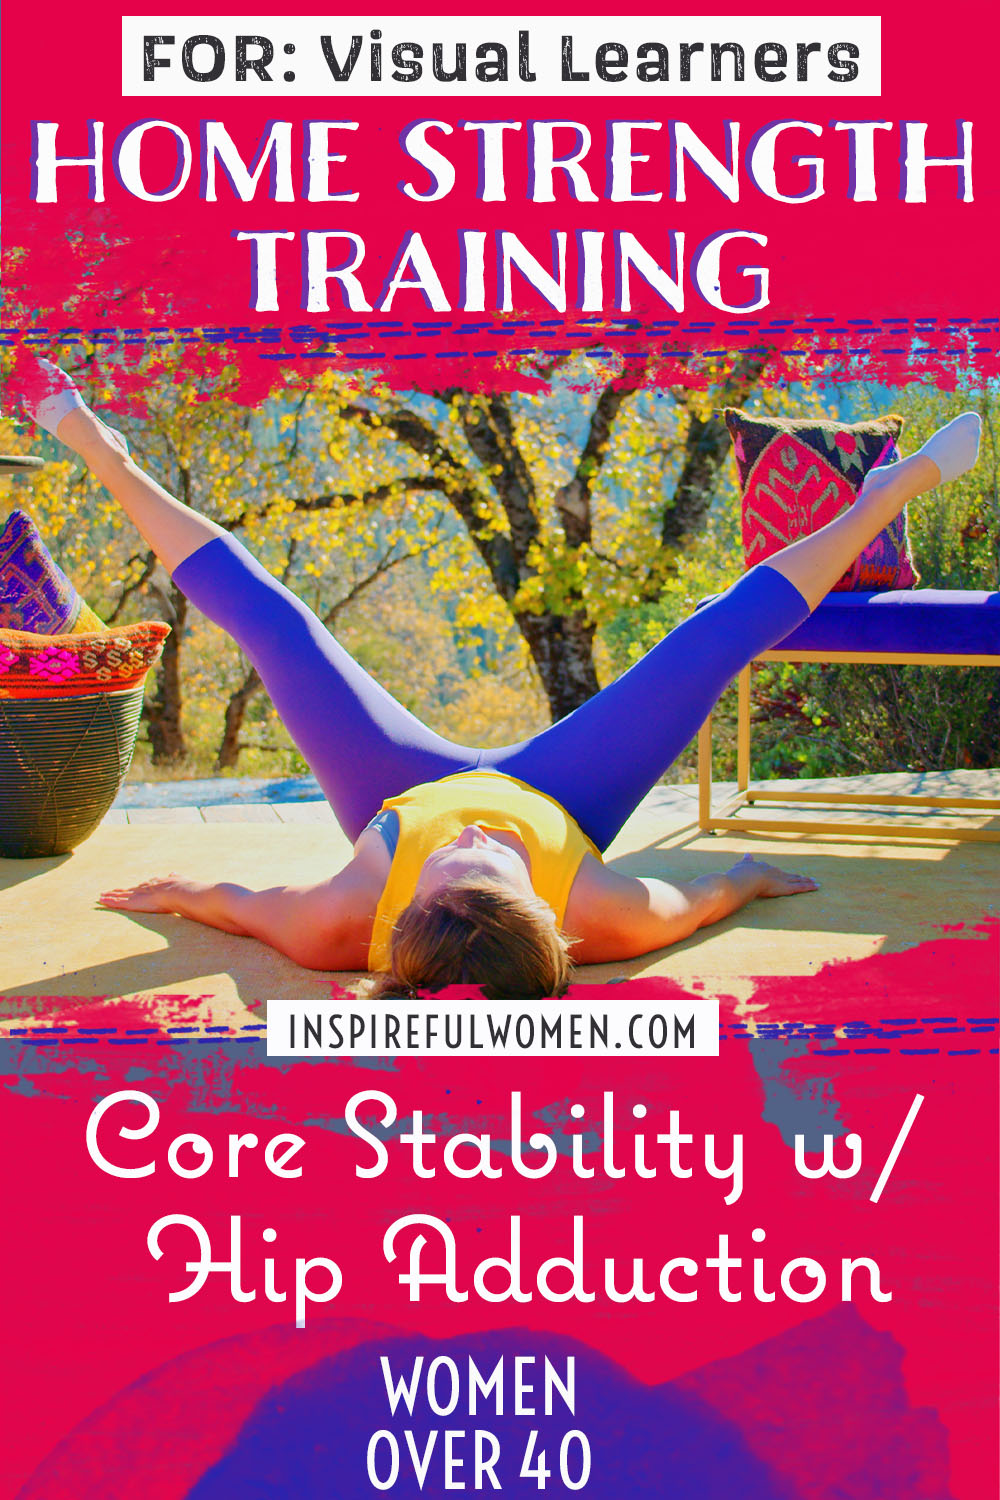 core-stability-with-hip-adduction-abdominal-exercise-at-home-women-over-40